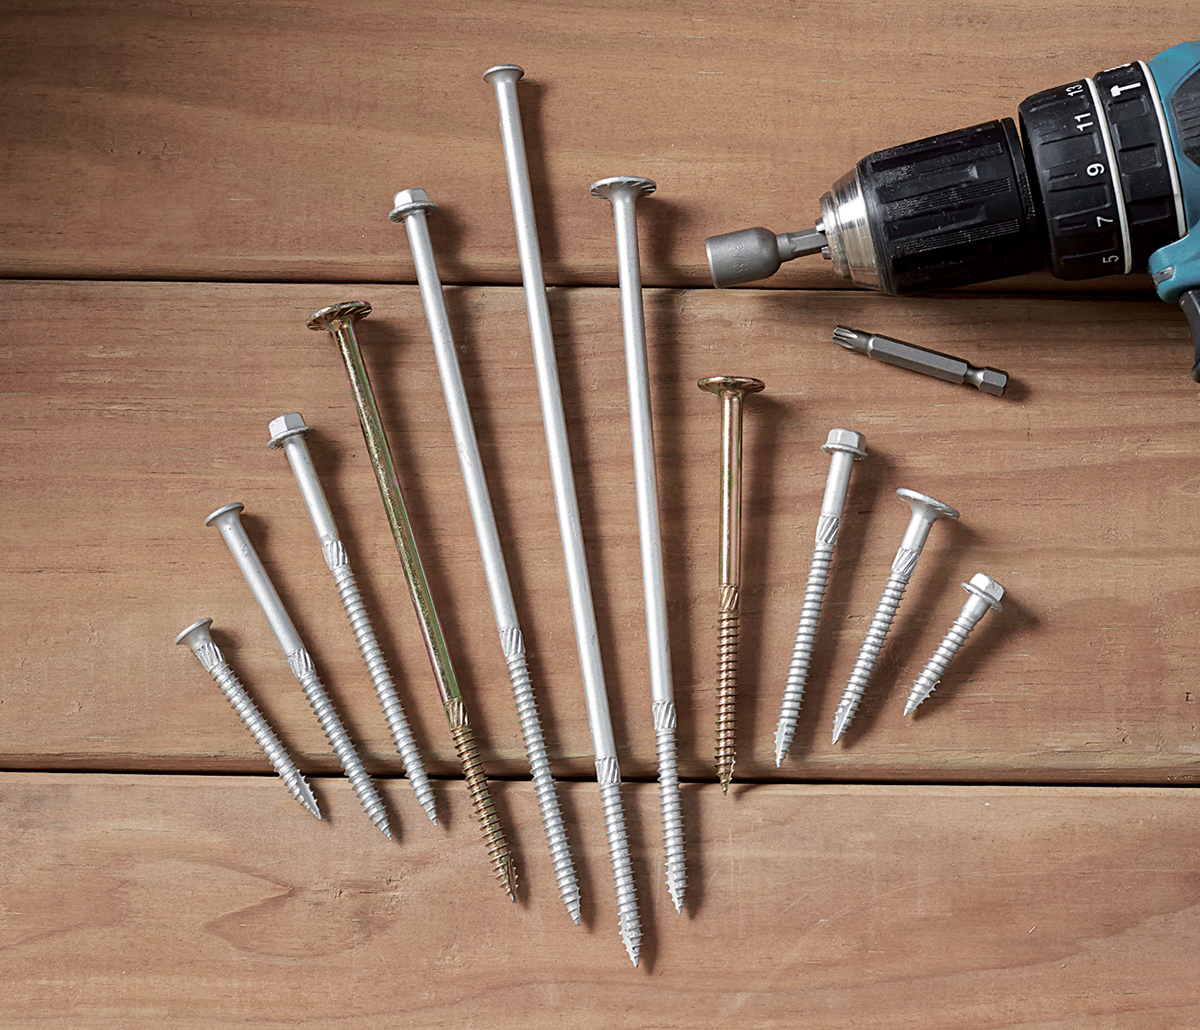 MiTek Structural Wood Screws Engineered Systems Products - Flatlay of structural wood screws